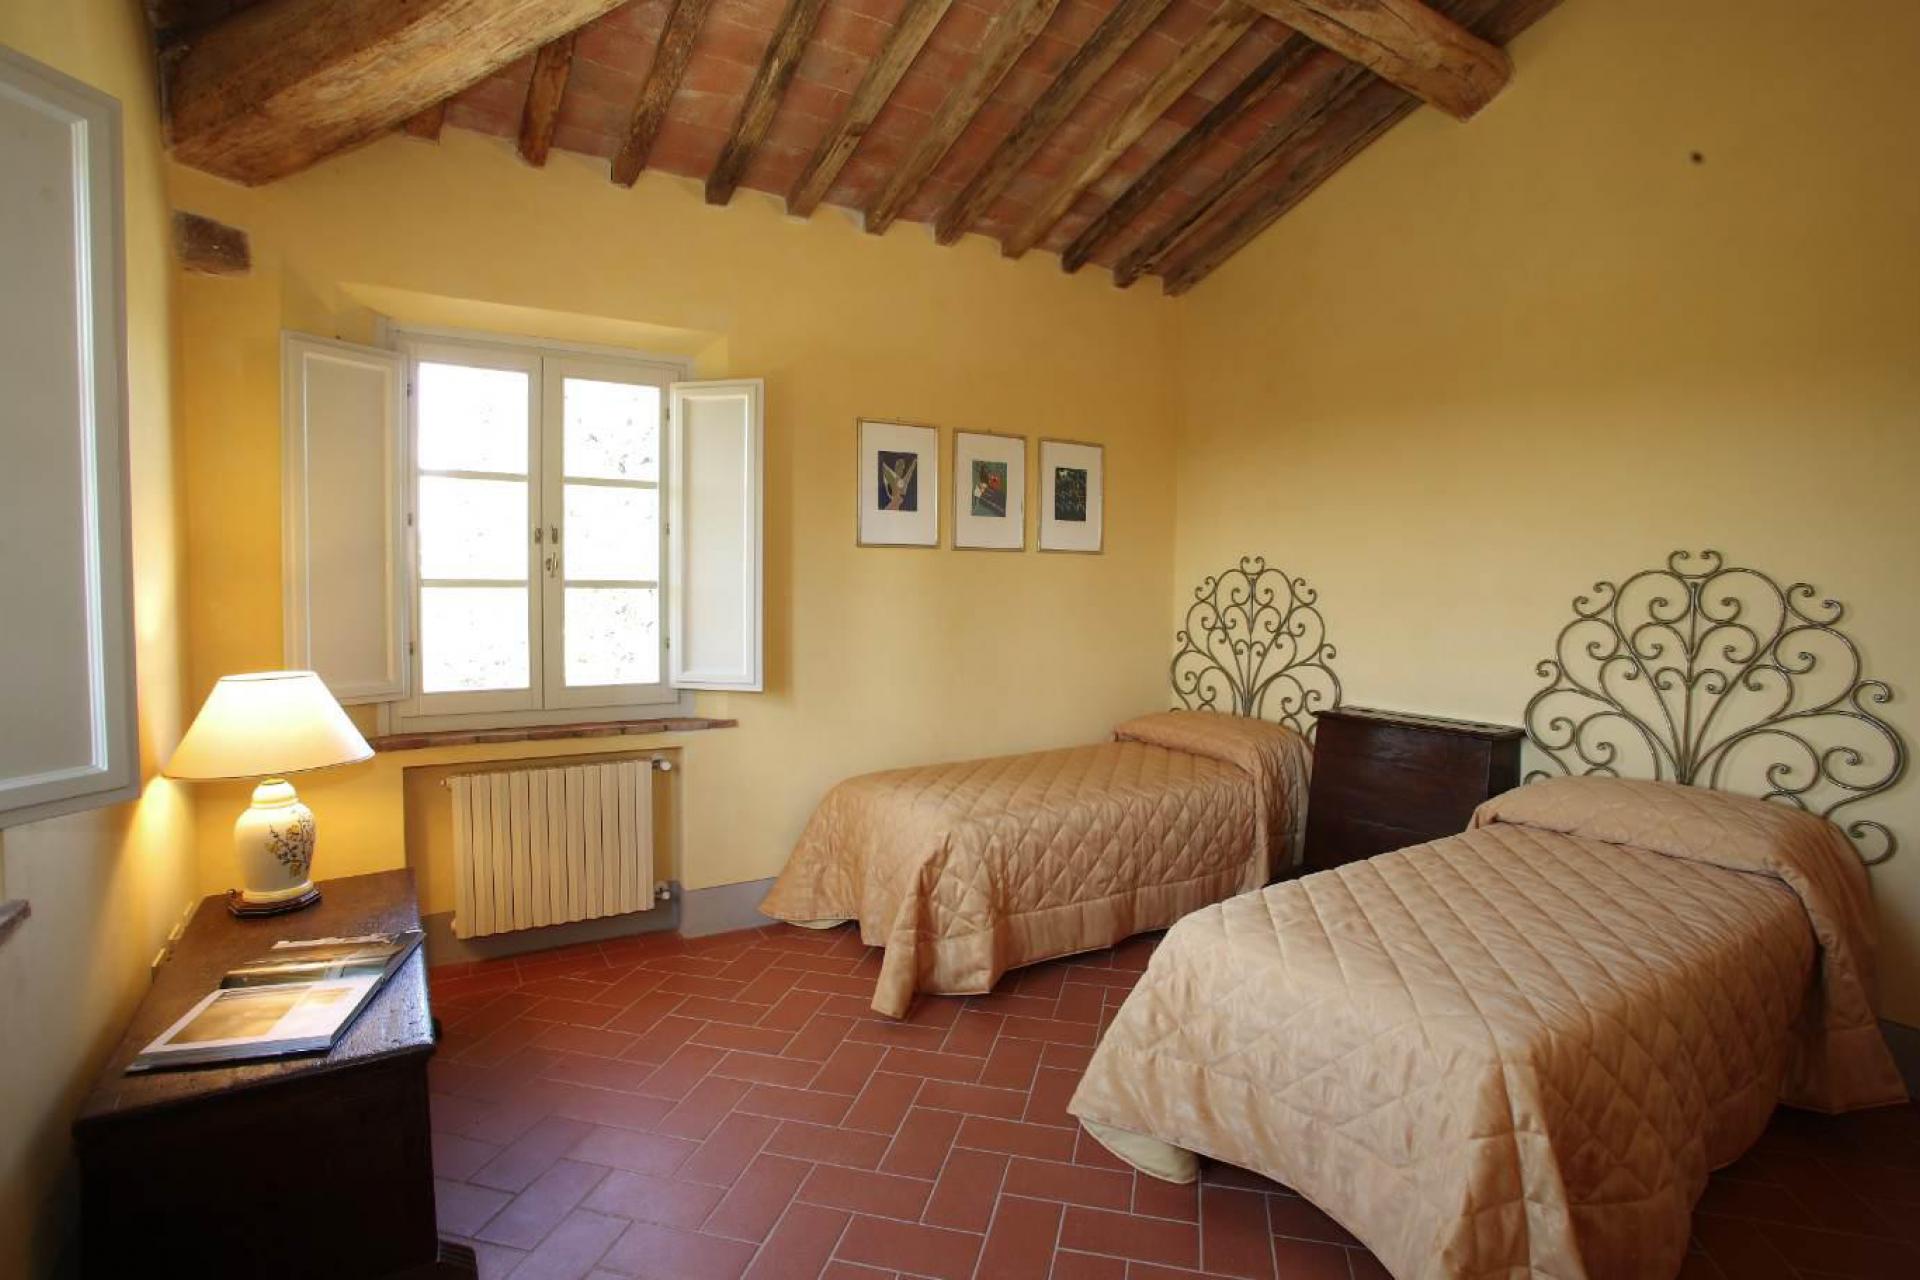 Cozy agriturismo in a beautiful location